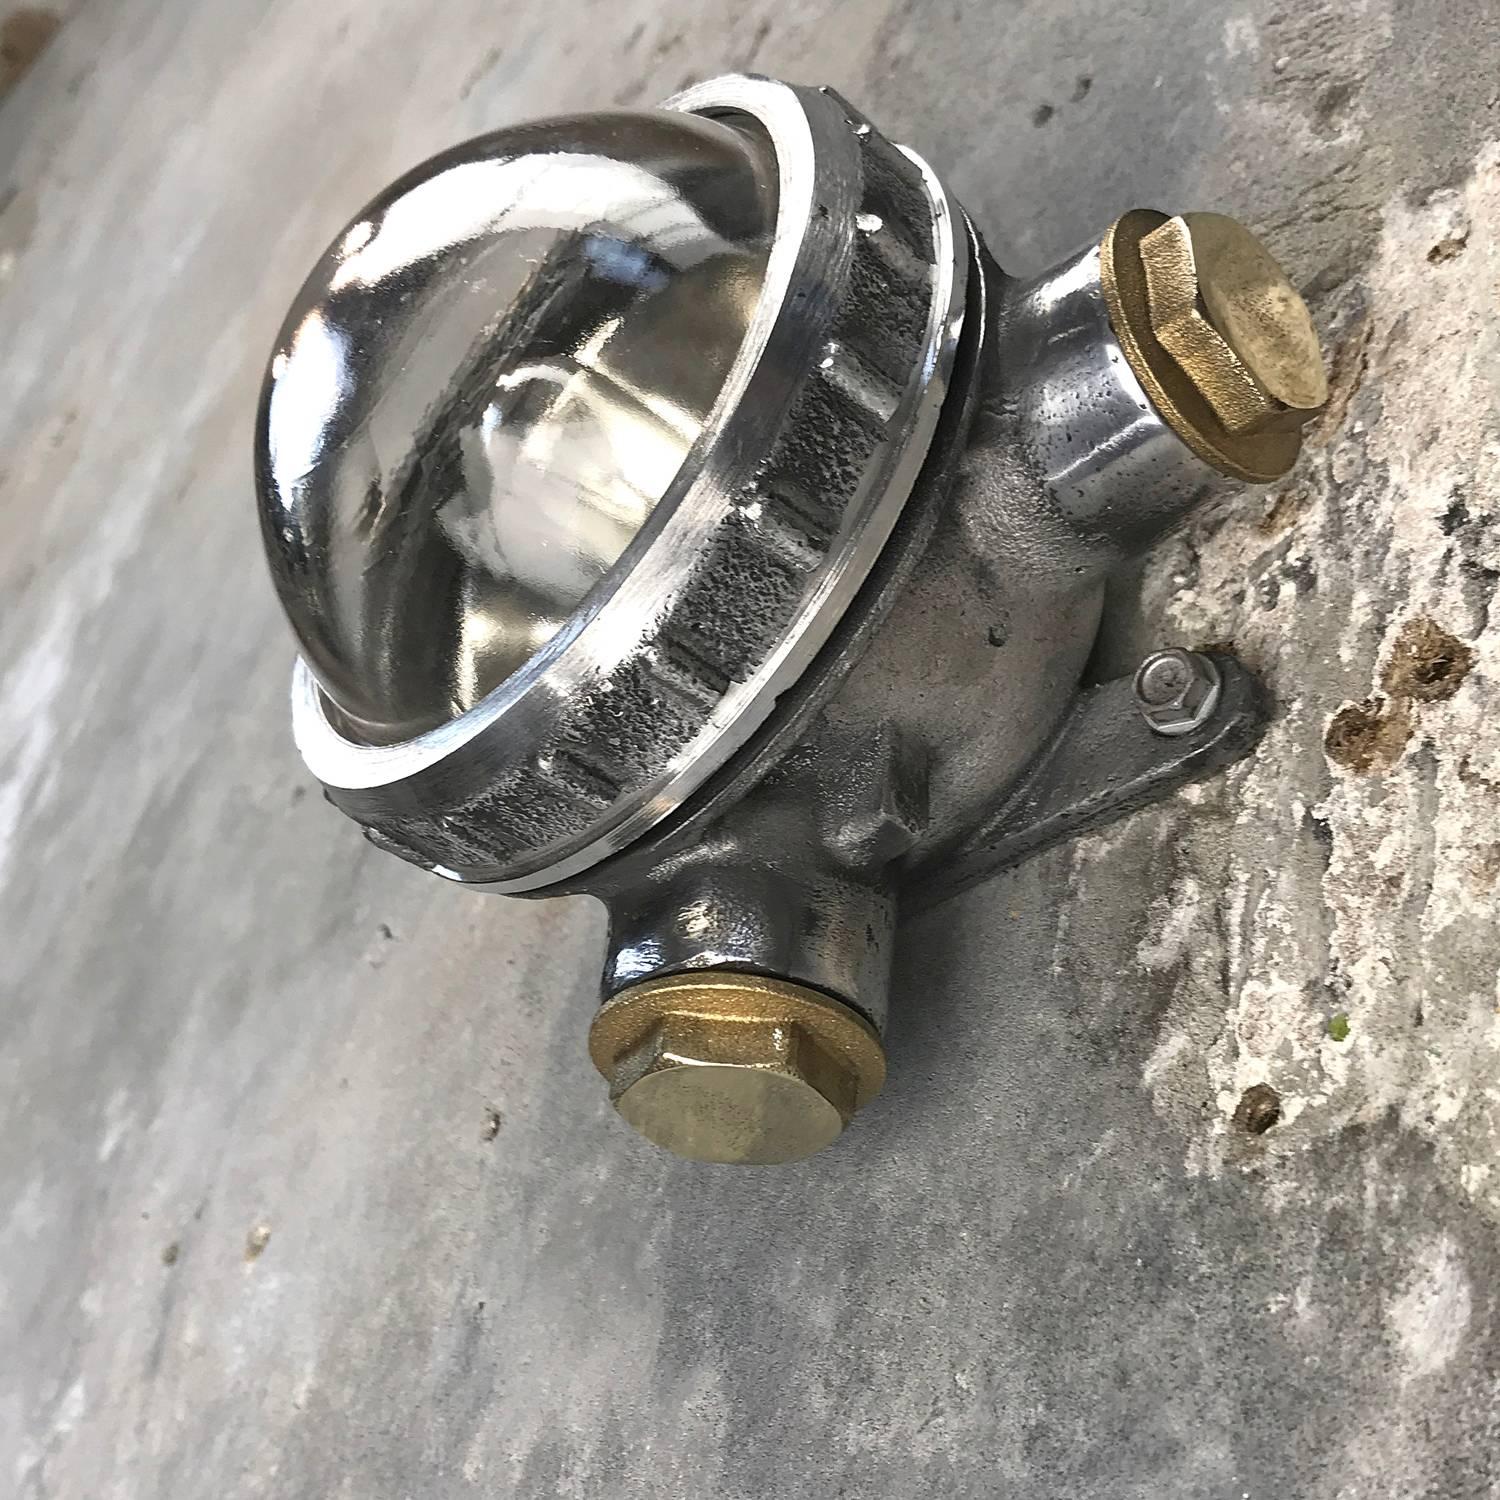 Reclaimed from Russian cargo ships built during the 1970s these micro spot lights are a very versatile lighting solution for domestic and commercial environments.

They work extremely well as feature wall lights where space may be limited, foot